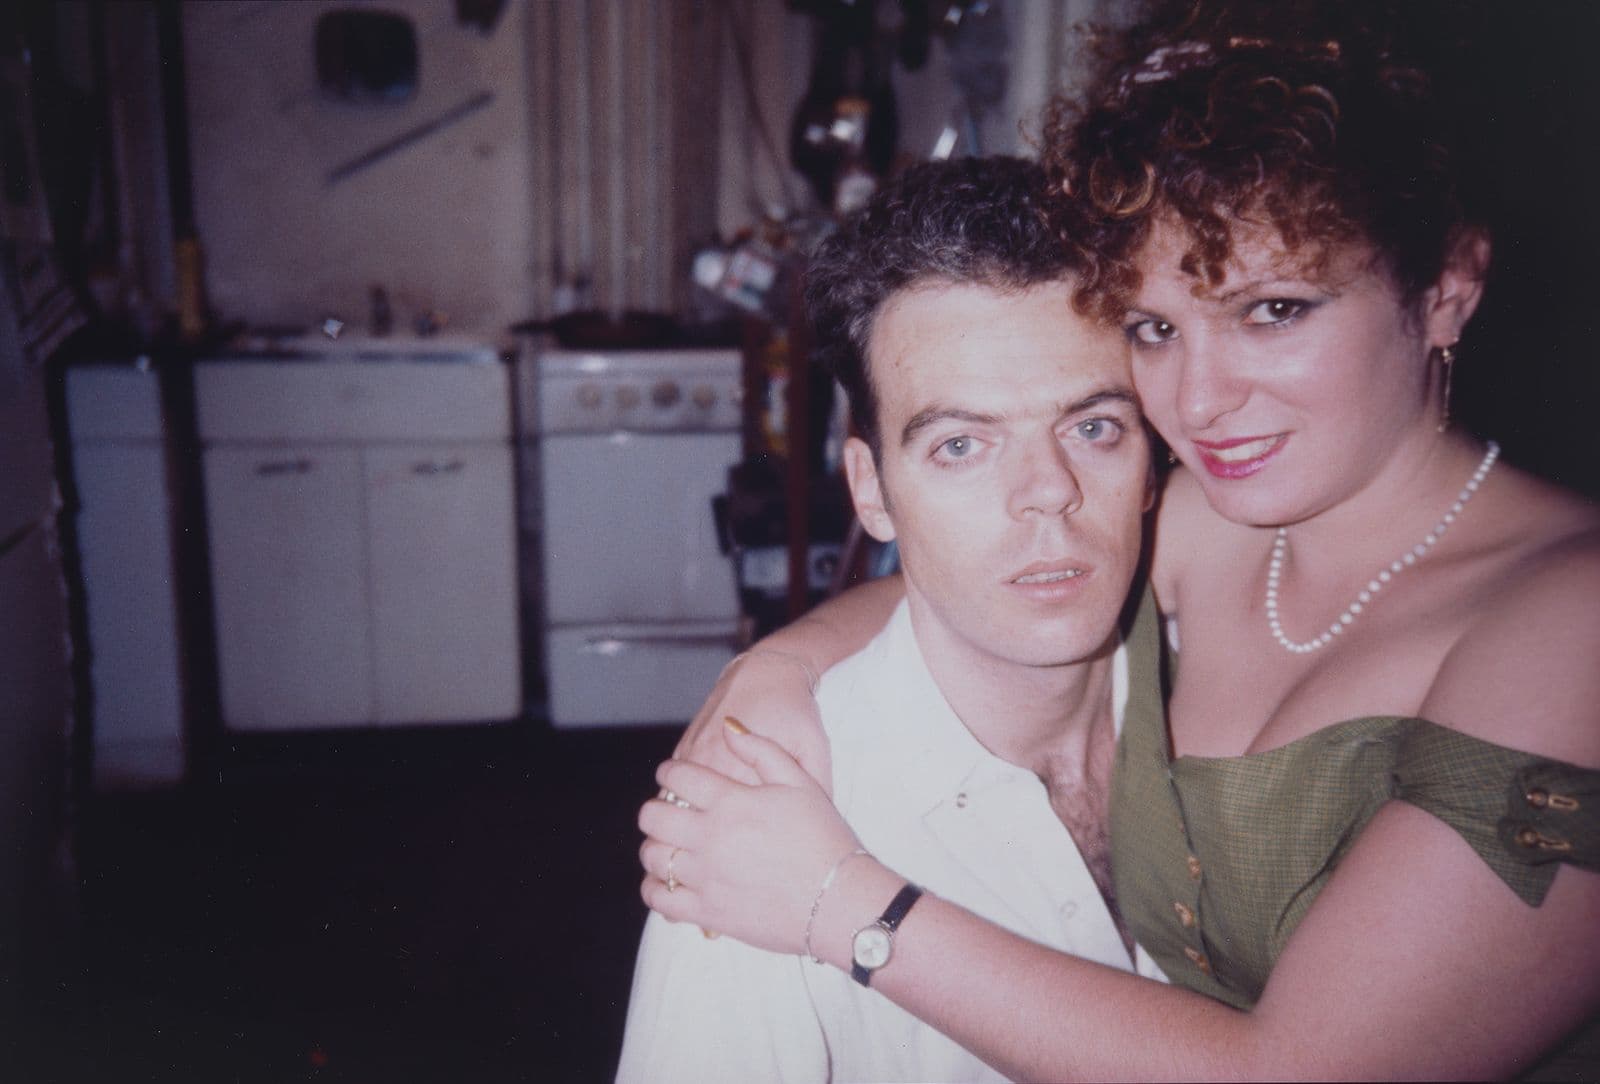 Colour Cibachrome photograph of a man and a woman, with the woman's arms around his neck smiling.